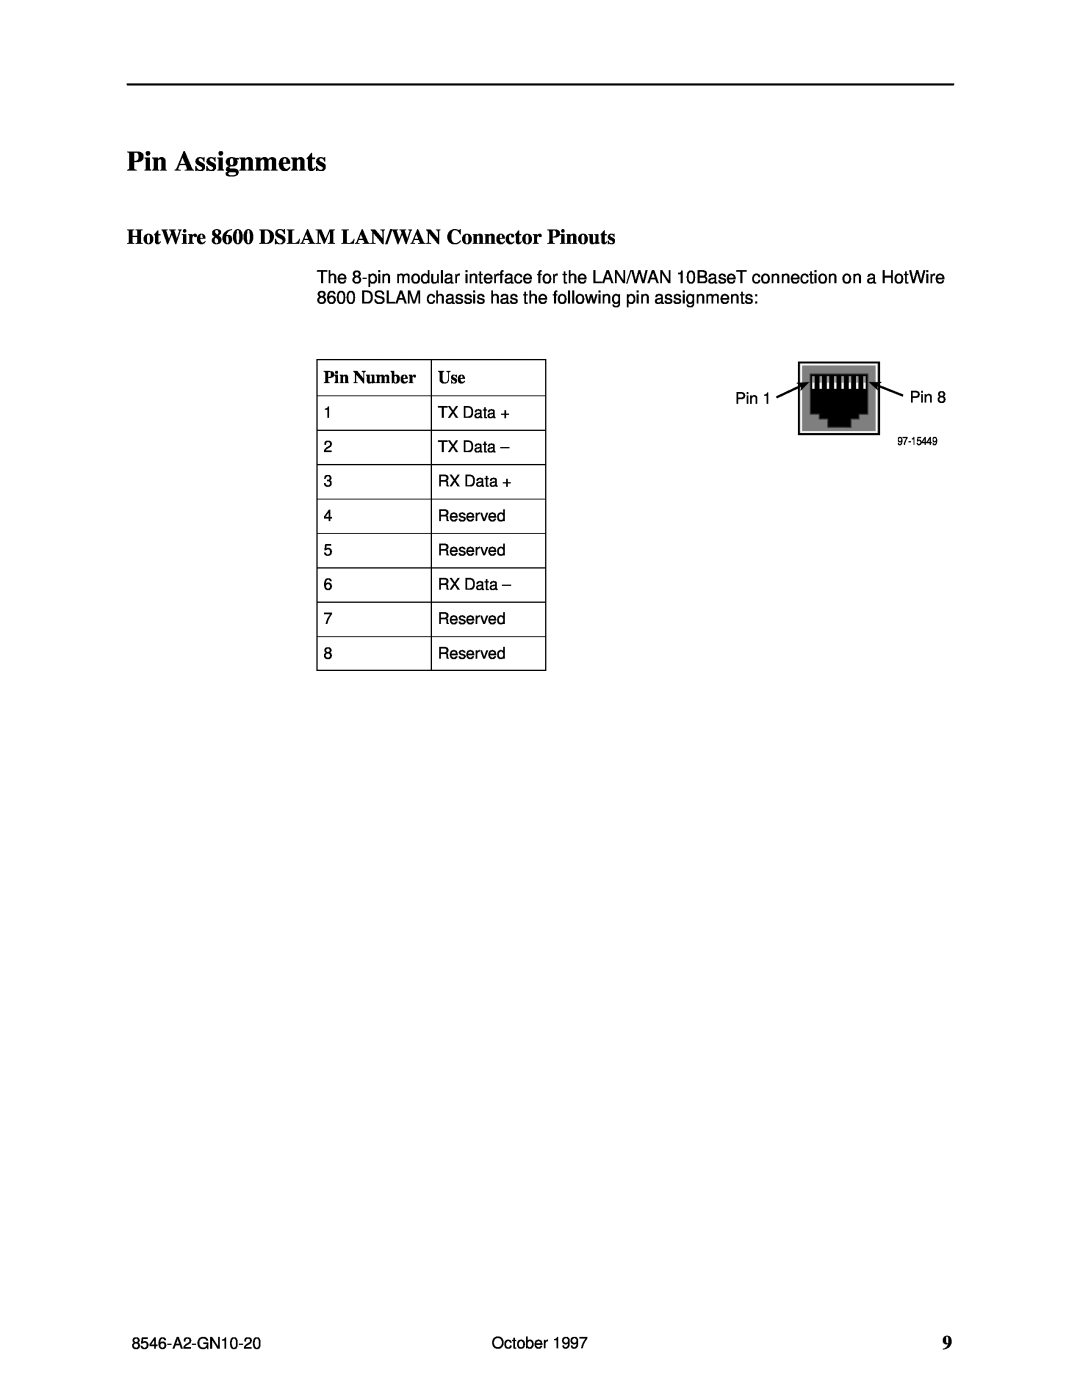 Paradyne 8546 installation instructions Pin Assignments, HotWire 8600 DSLAM LAN/WAN Connector Pinouts 